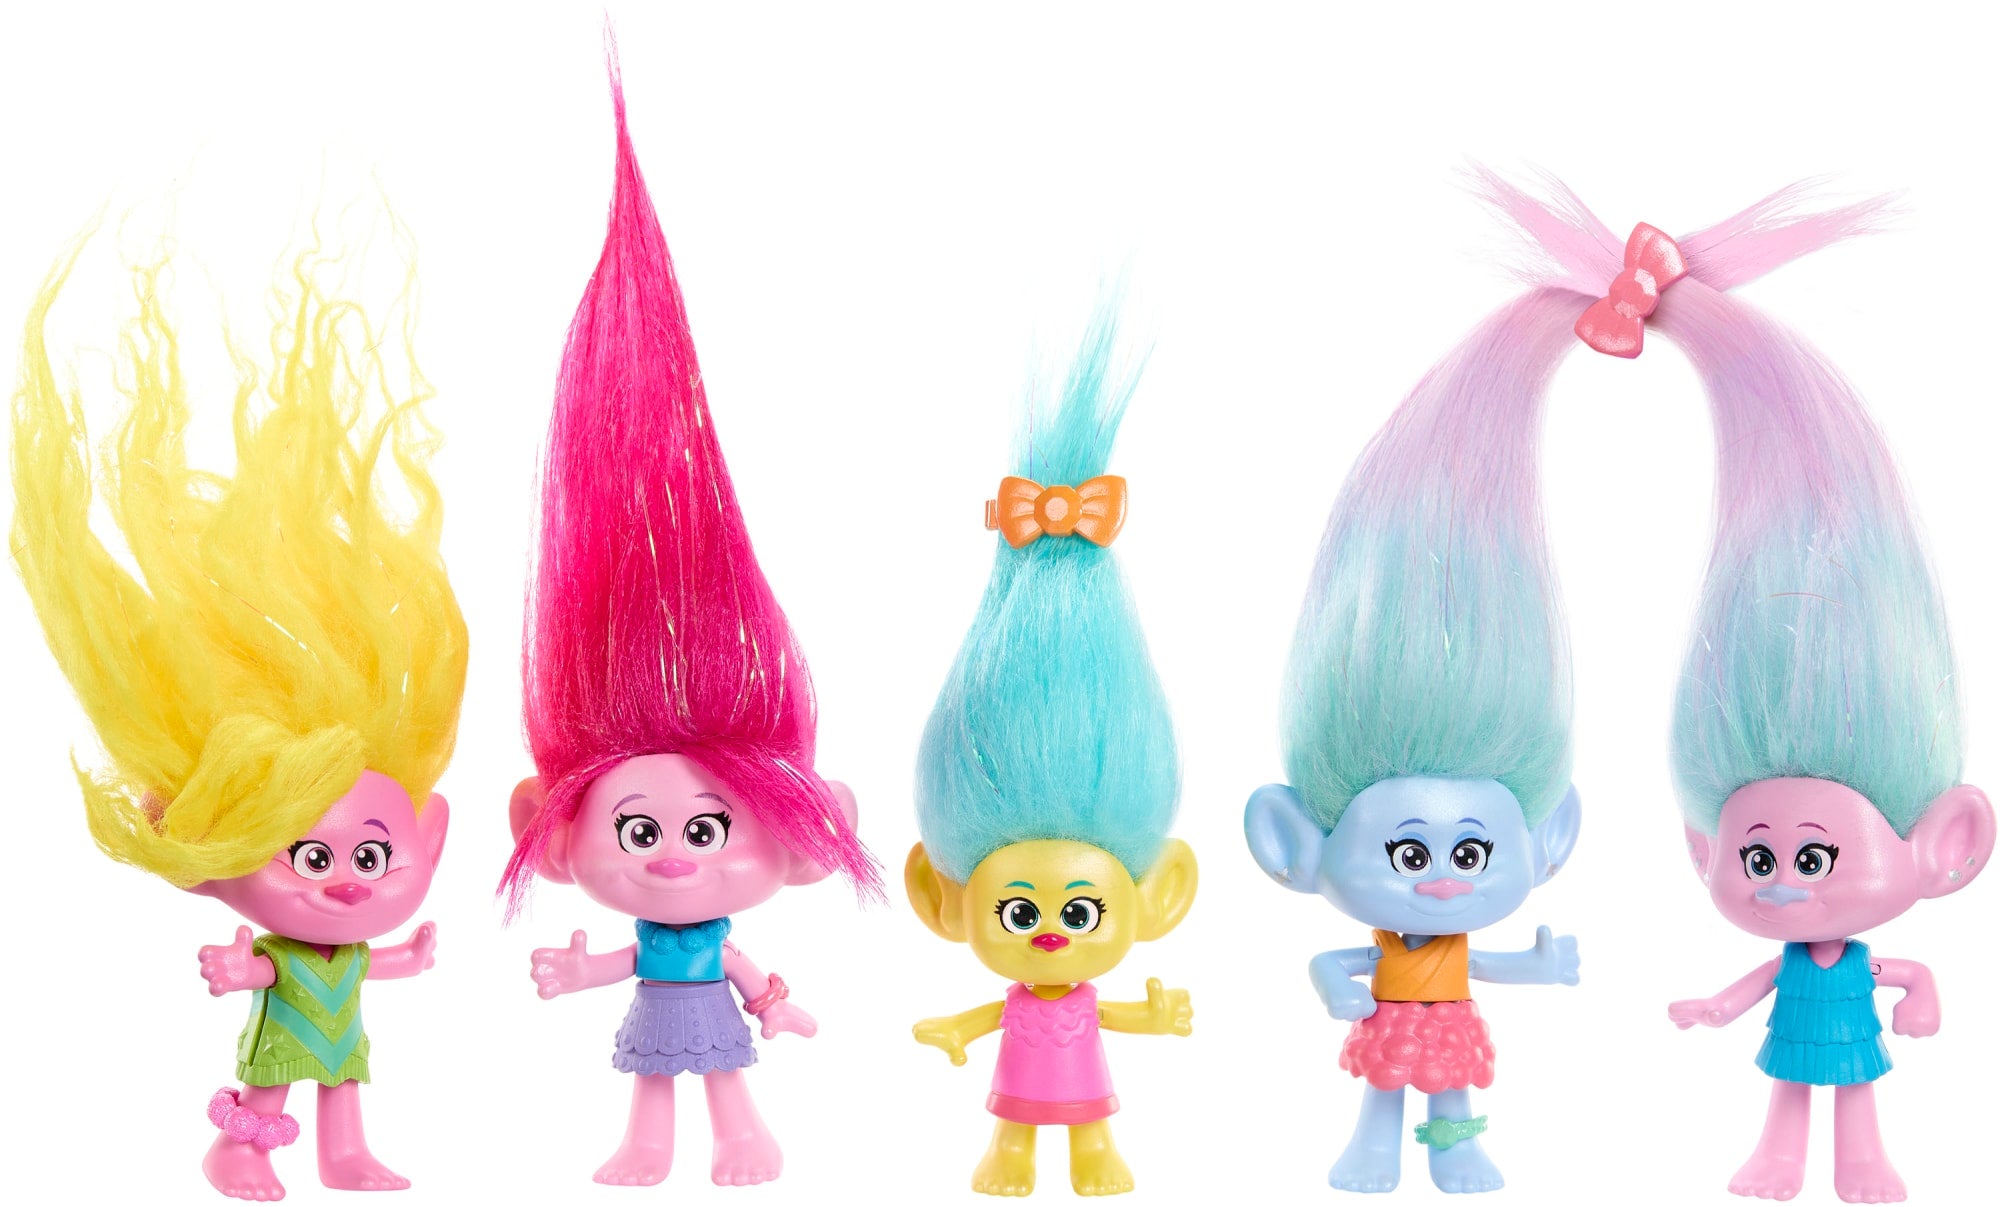 Dreamworks Trolls Band Together Brozone on Tour Small Dolls Set with Stand, Collectible Toy